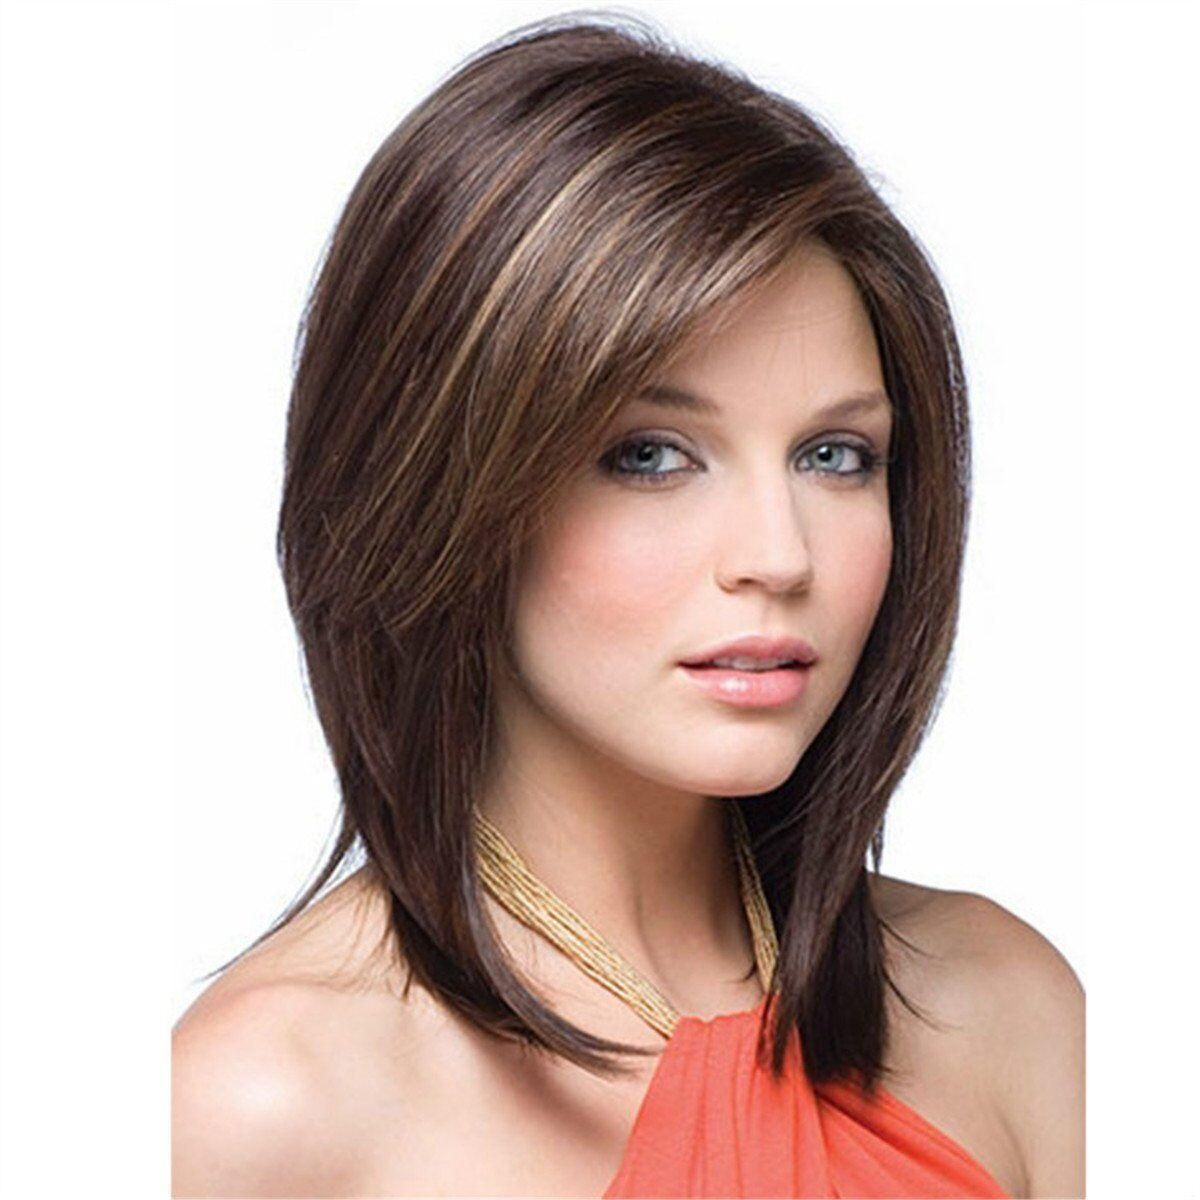 14 Beauty Short Bob Wave Wigs Shoulder Length Short Straight For Fashion Women S Full Hair Wig Straight Synthetic Bob Wig With Bangs Curly Lace Front